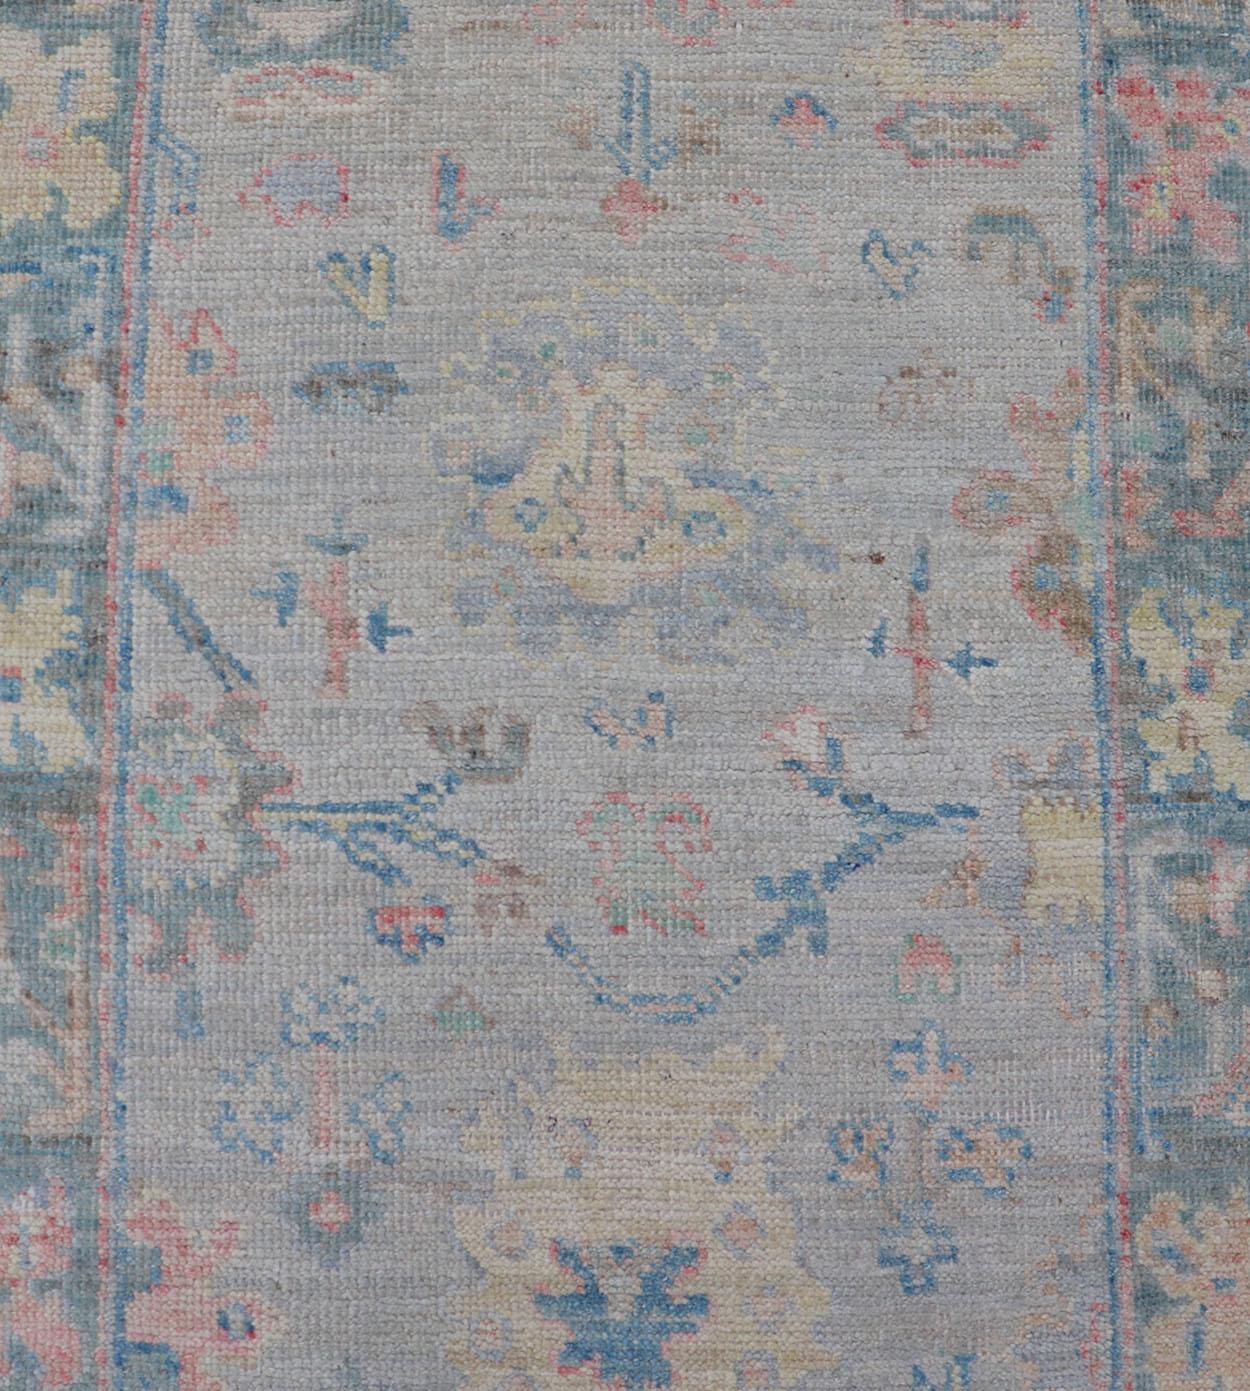 Measures: 2'5 x 9'10 
Hand-Knotted Modern Oushak Runner on Light Gray Field and Colorful Motifs. Keivan Woven Arts; rug AWR-12648 Country of Origin: Afghanistan Type: Oushak Design: Floral, All-Over, Arabesque 21st Century 

This Oushak runner has